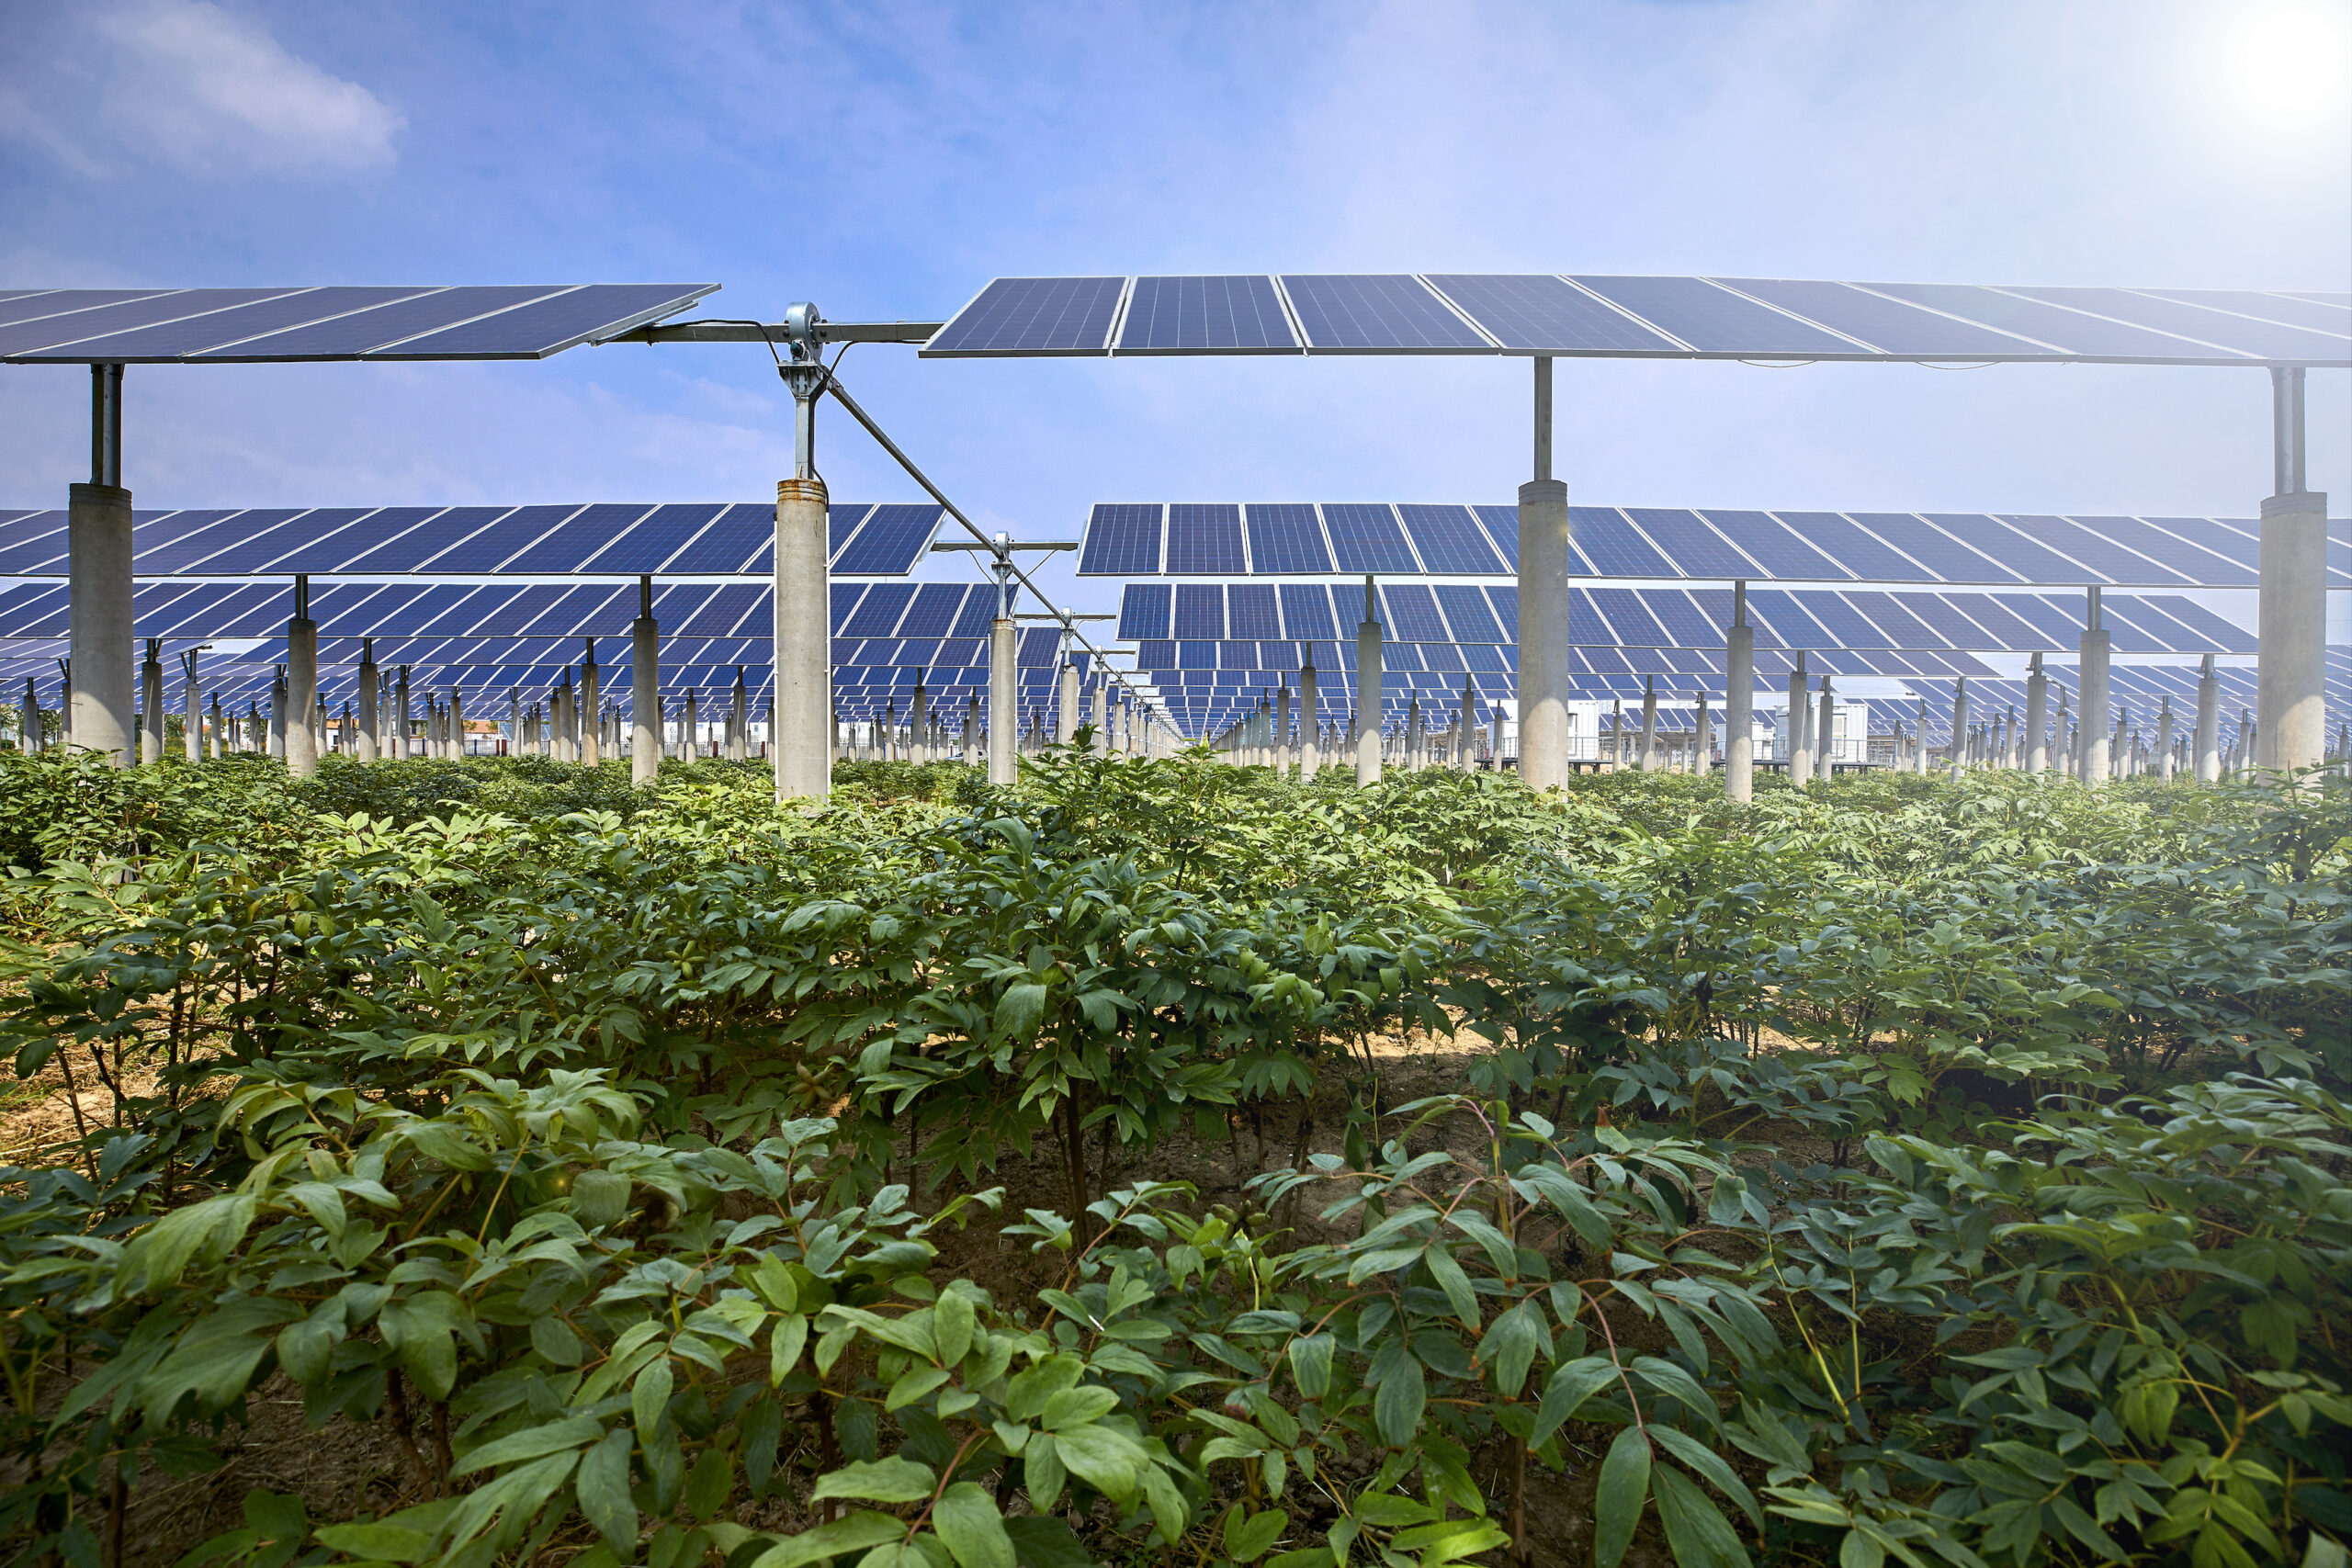 ‘Agrivoltaics’: A Growing Concept That Combines Solar Power and Agriculture